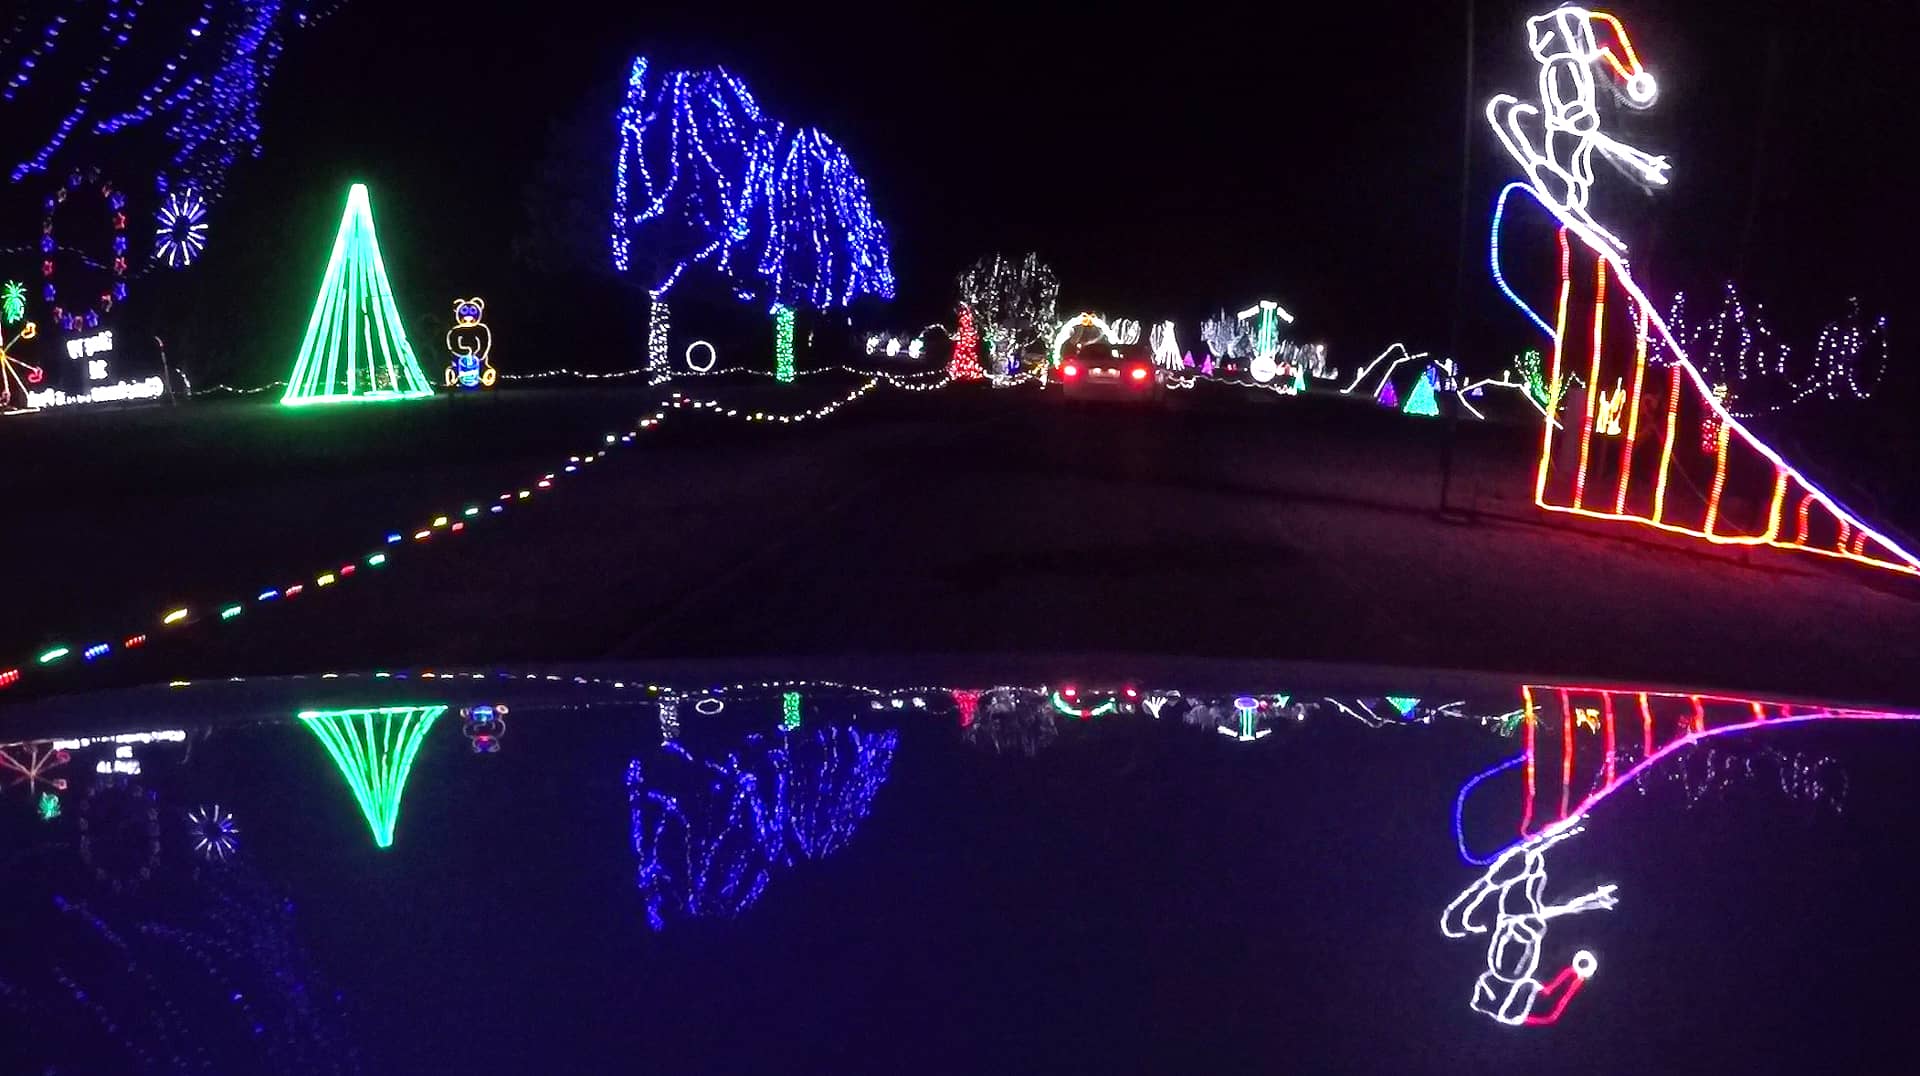 Video Ride along for a colorful tour of the Longview Lake Christmas